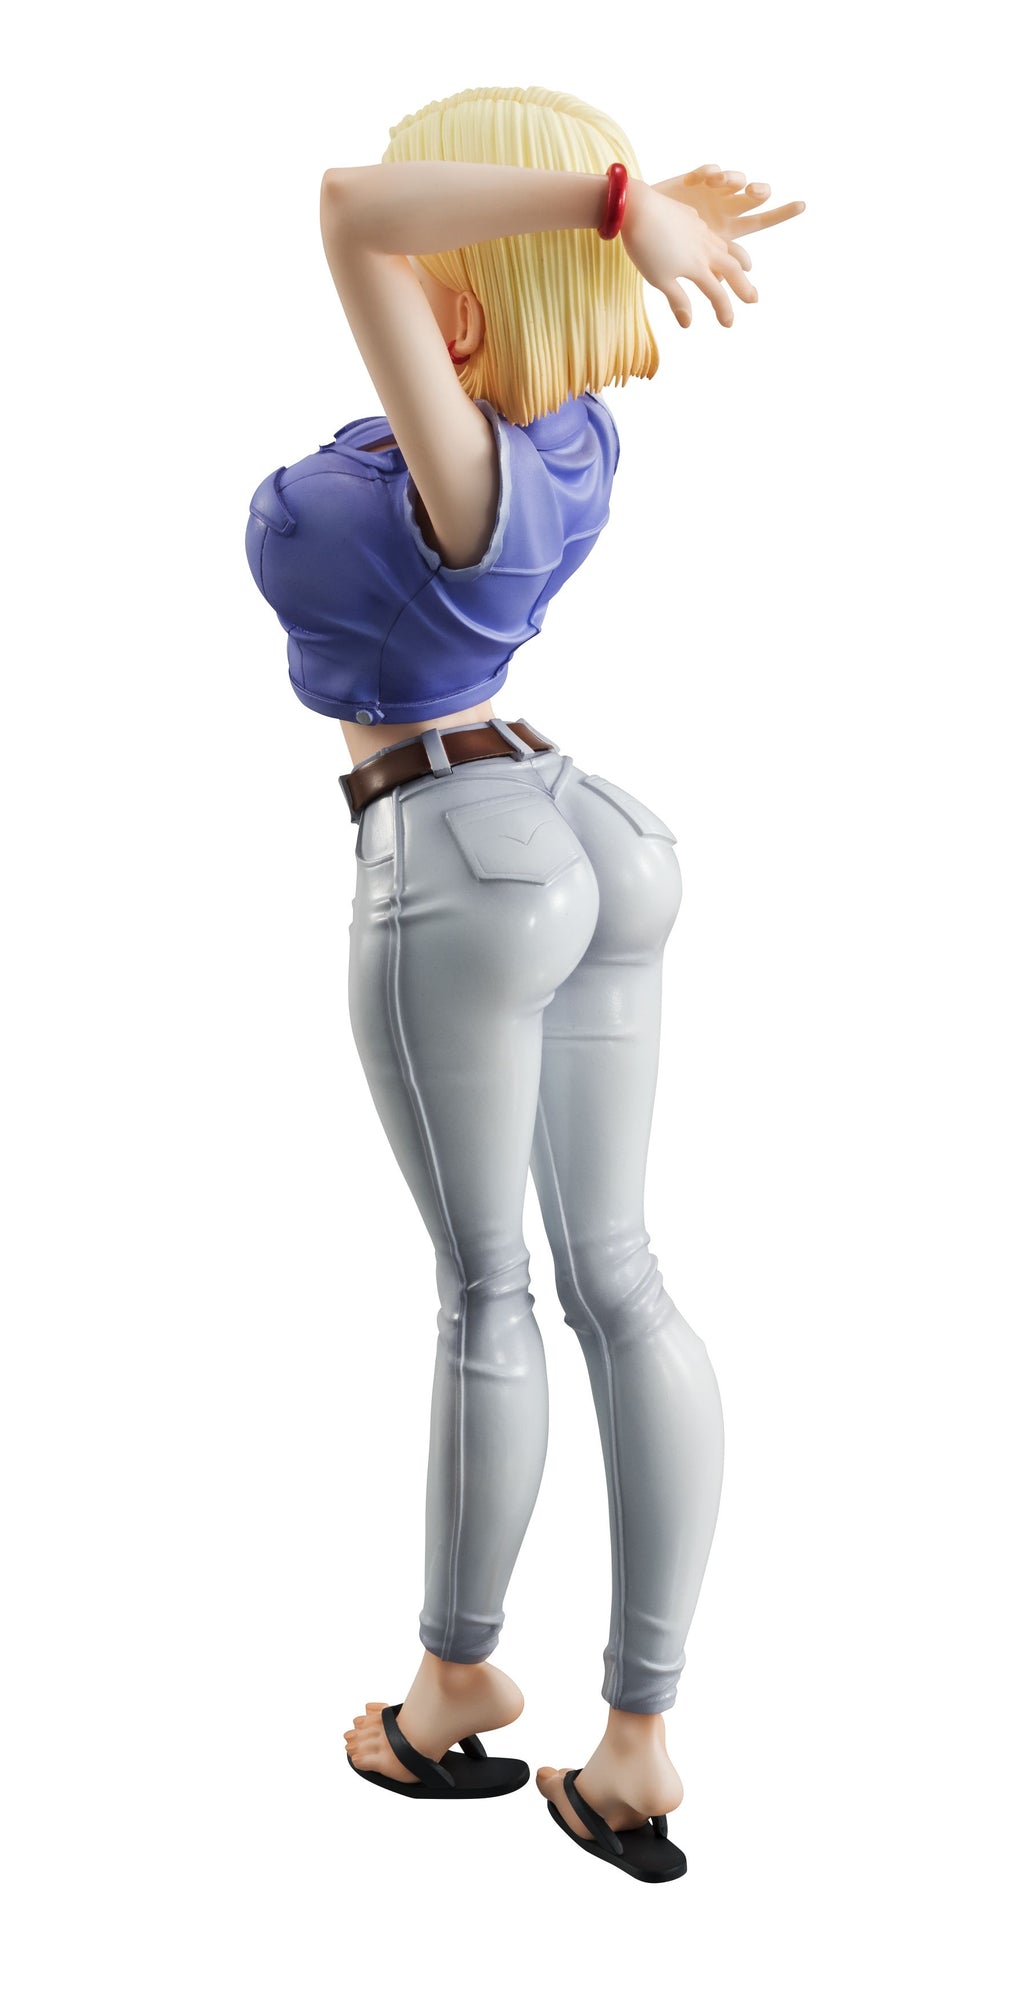 android 18 butt naked